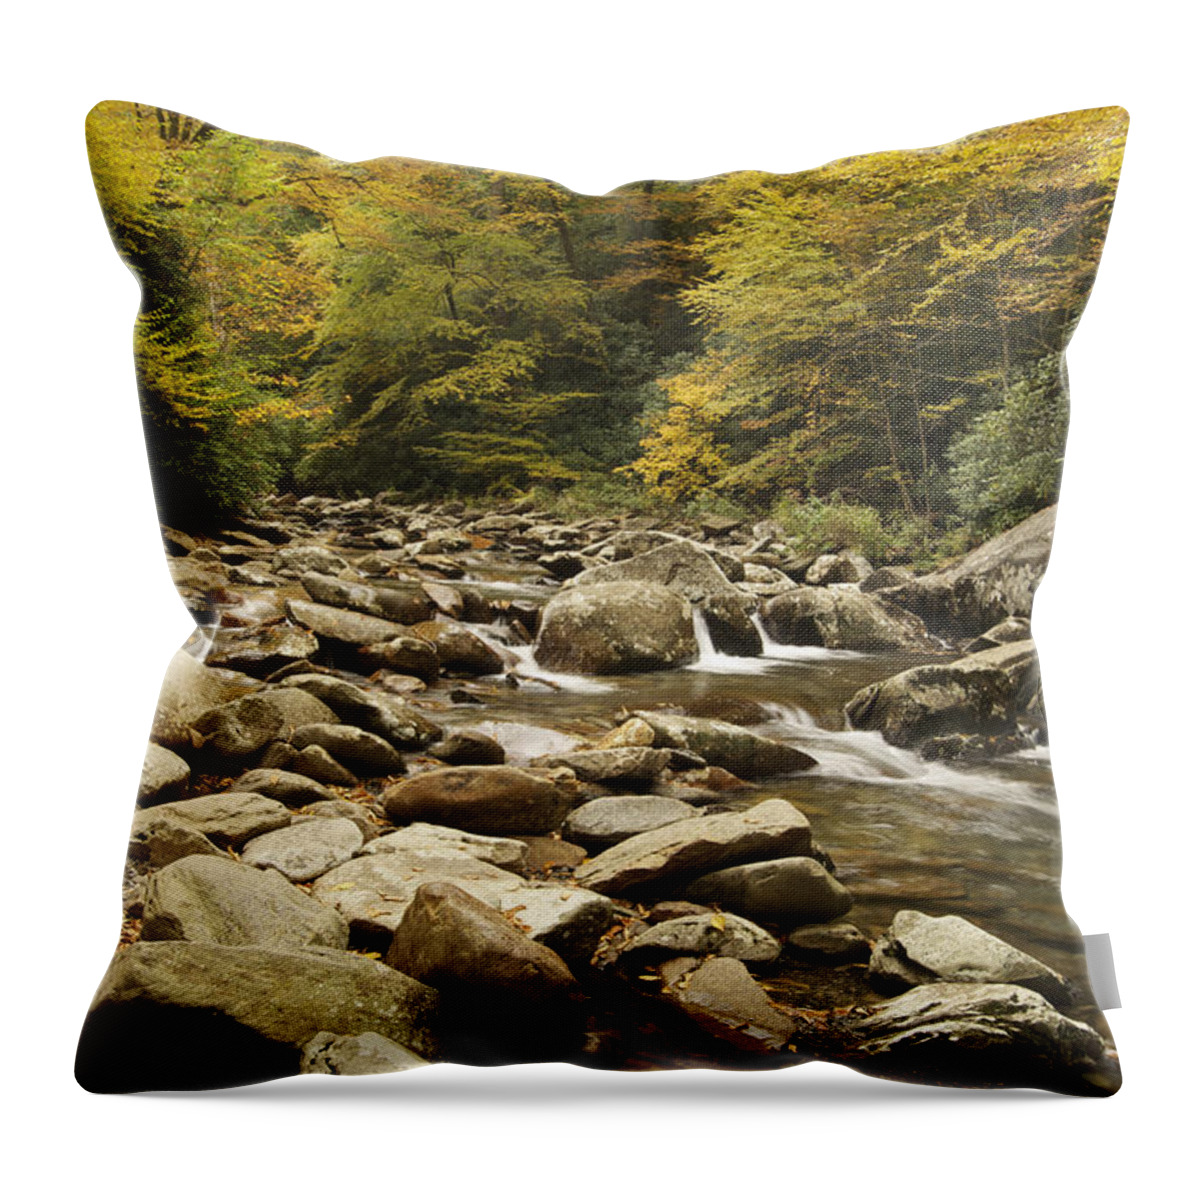 Autumn Throw Pillow featuring the photograph Tennessee Autumn Stream 6059 by Michael Peychich